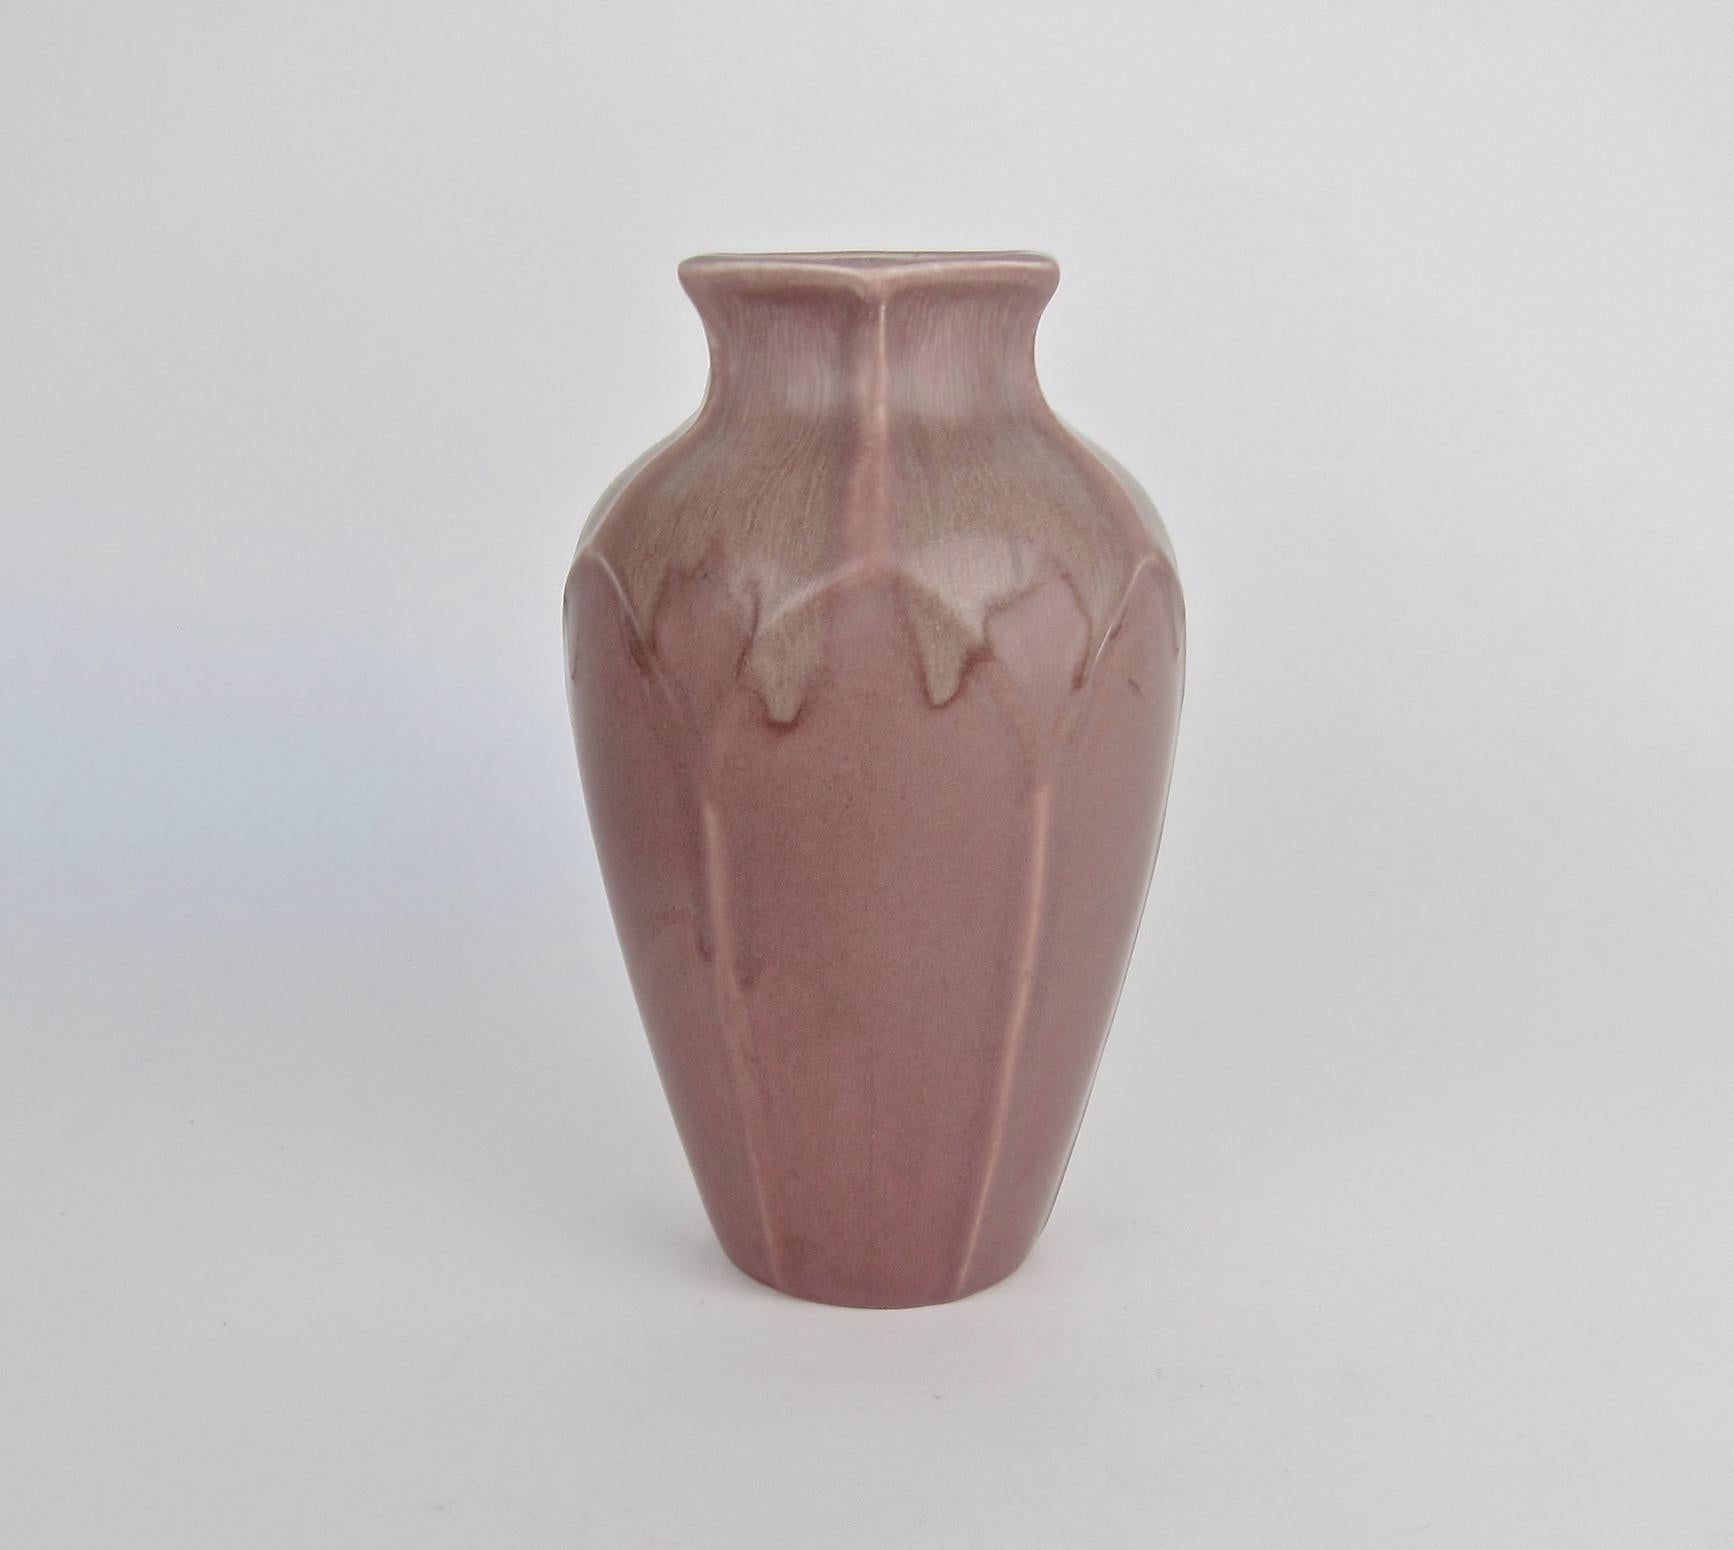 A large Rookwood Pottery production vase made during the Arts and Crafts period in 1921. The American art pottery vase is a substantial piece with an hexagonal mouth and molded points encircling the shoulder connecting to ridges down the body. The